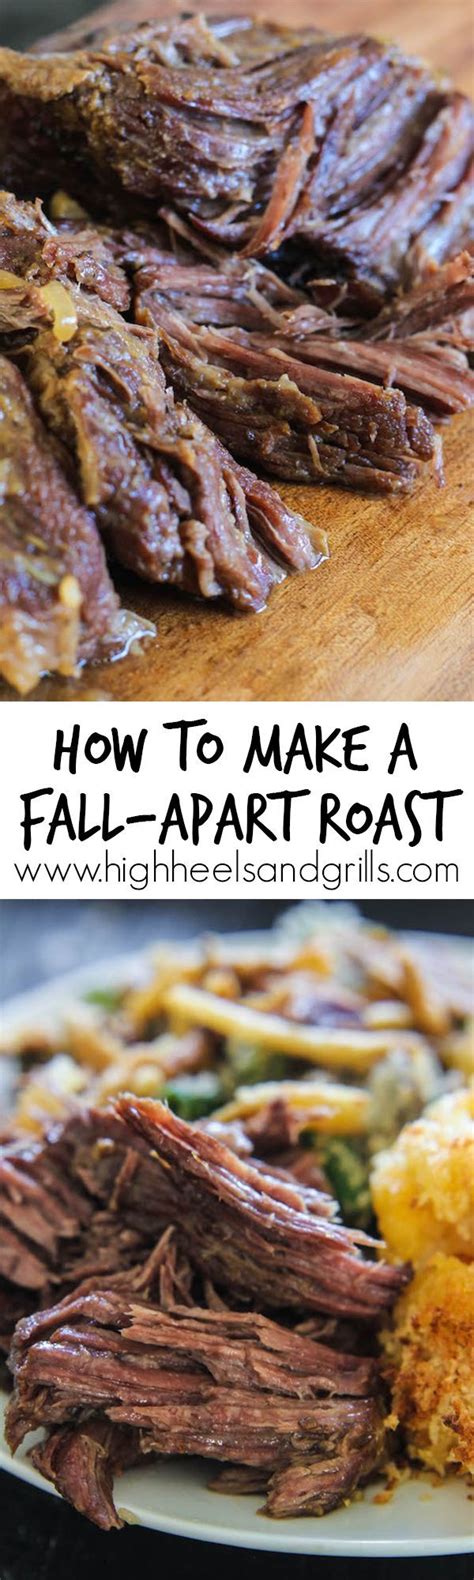 Simply bread your pork chops using a stuffing mix and then bake them until golden brown. How to Make a Fall-Apart Roast | Recipe | cuisine | Food recipes, Cooker recipes, Beef recipes